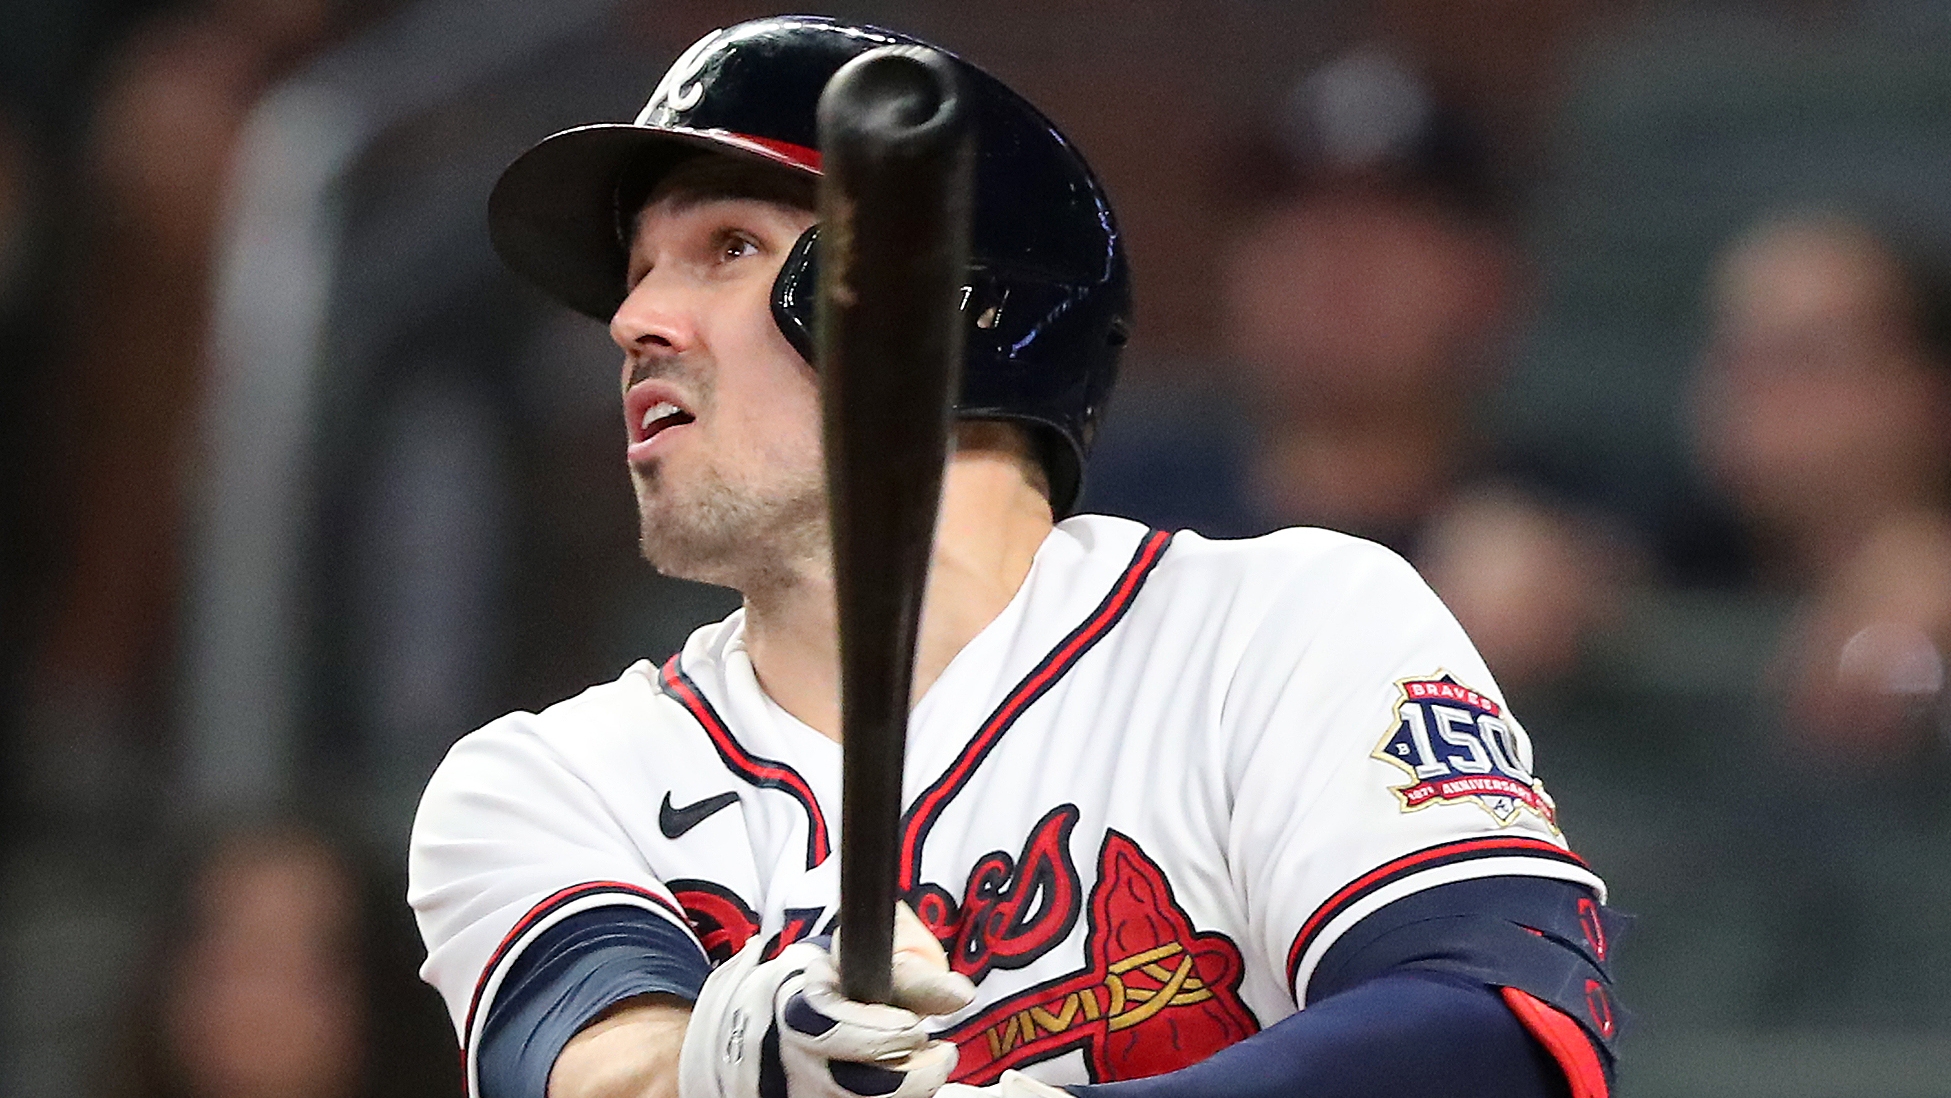 MLB playoffs: Adam Duvall has shown up when the Braves need him most 